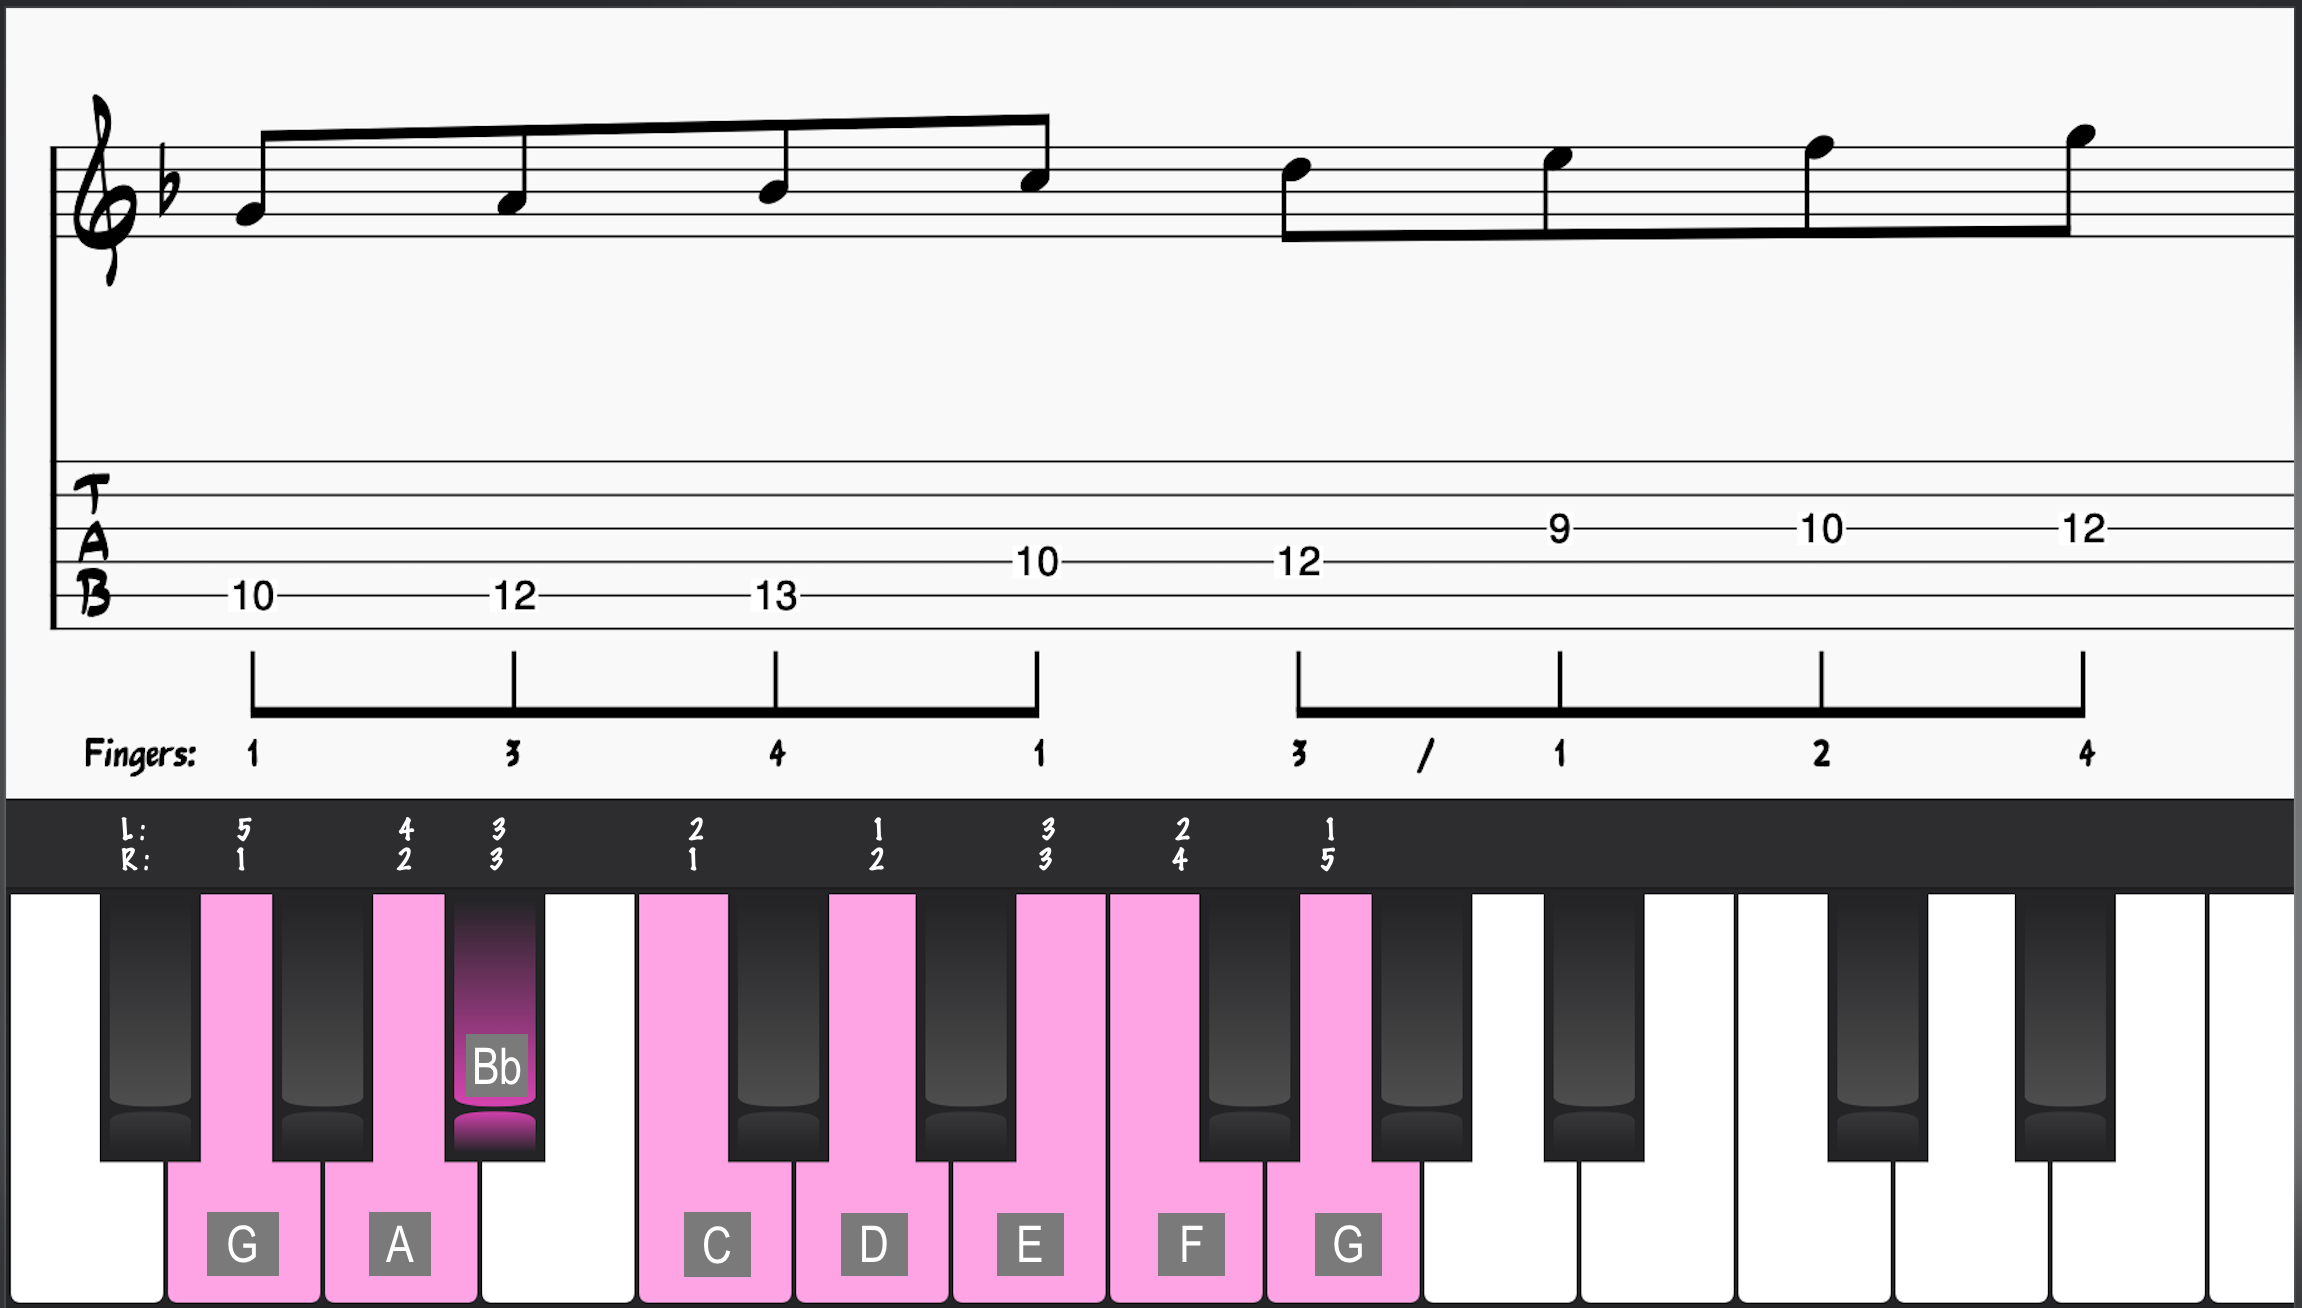 G Dorian Mode with Piano and Guitar Fingerings